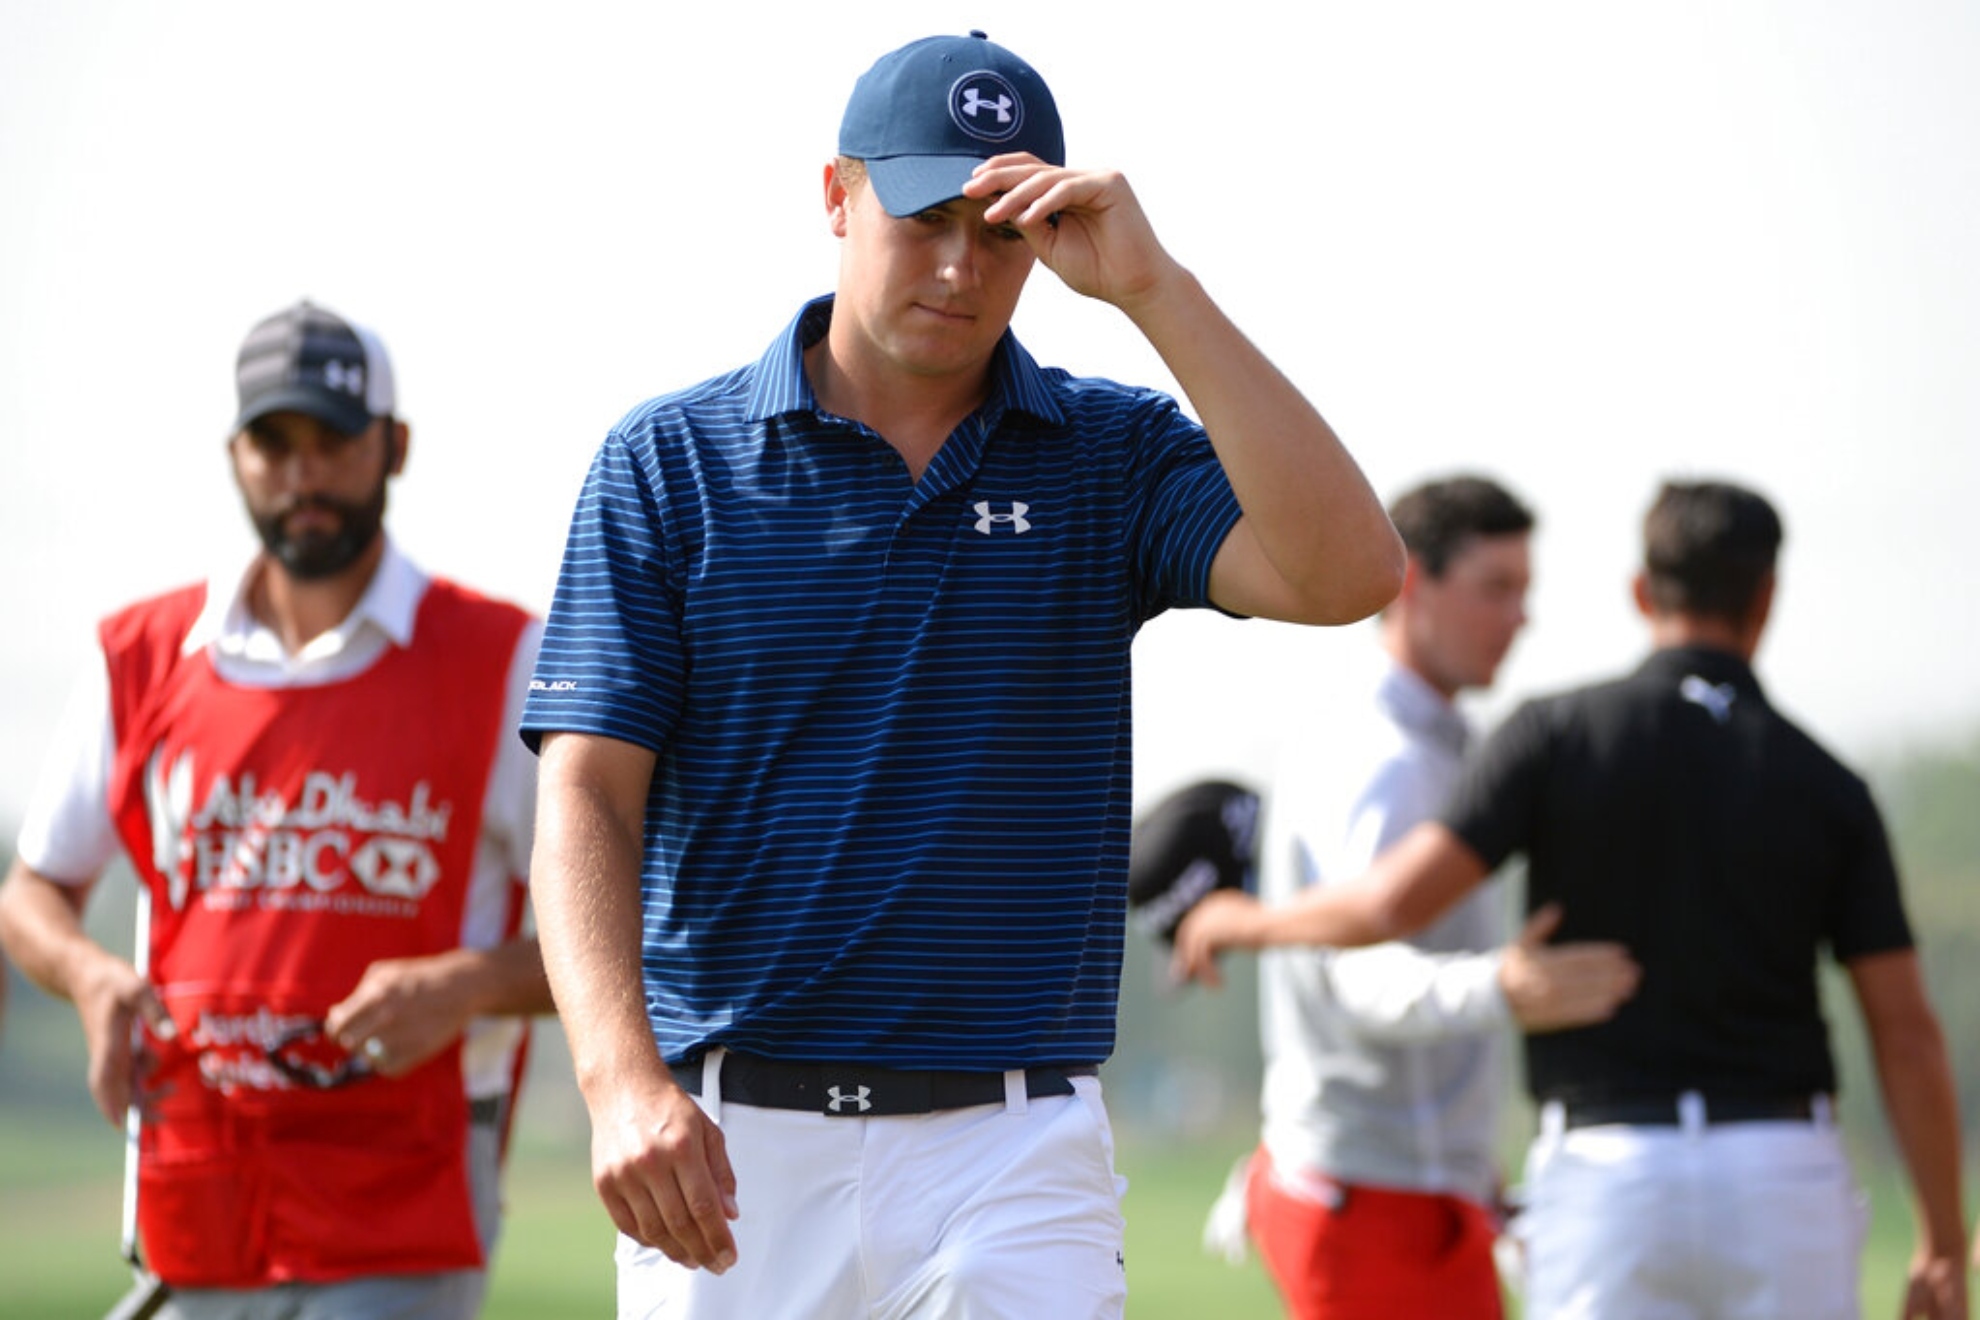 Rory McIlroy and Jordan Spieth have heated argument in the fairway during Players Championship